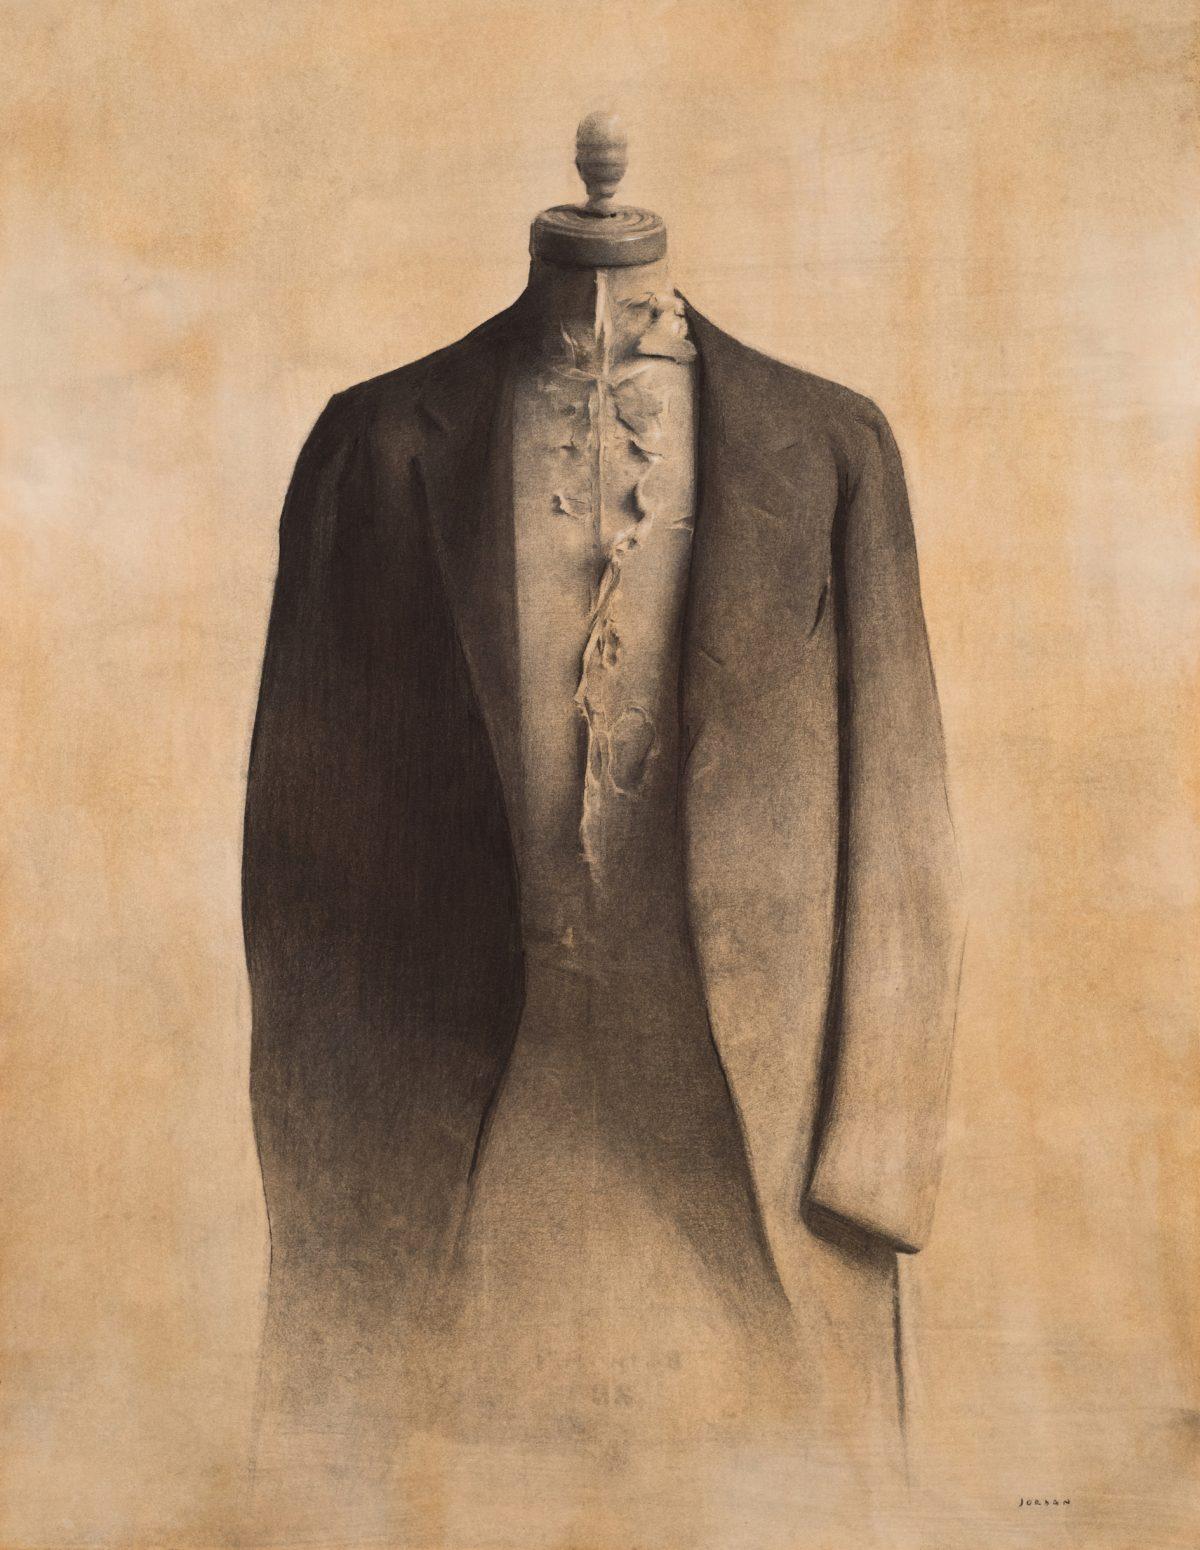 "Model 1925," 2017, by Jordan Sokol. Charcoal, pencil, and white chalk on hand toned paper, 29 1/4 inches by 38 1/2 inches. (Courtesy of Jordan Sokol)